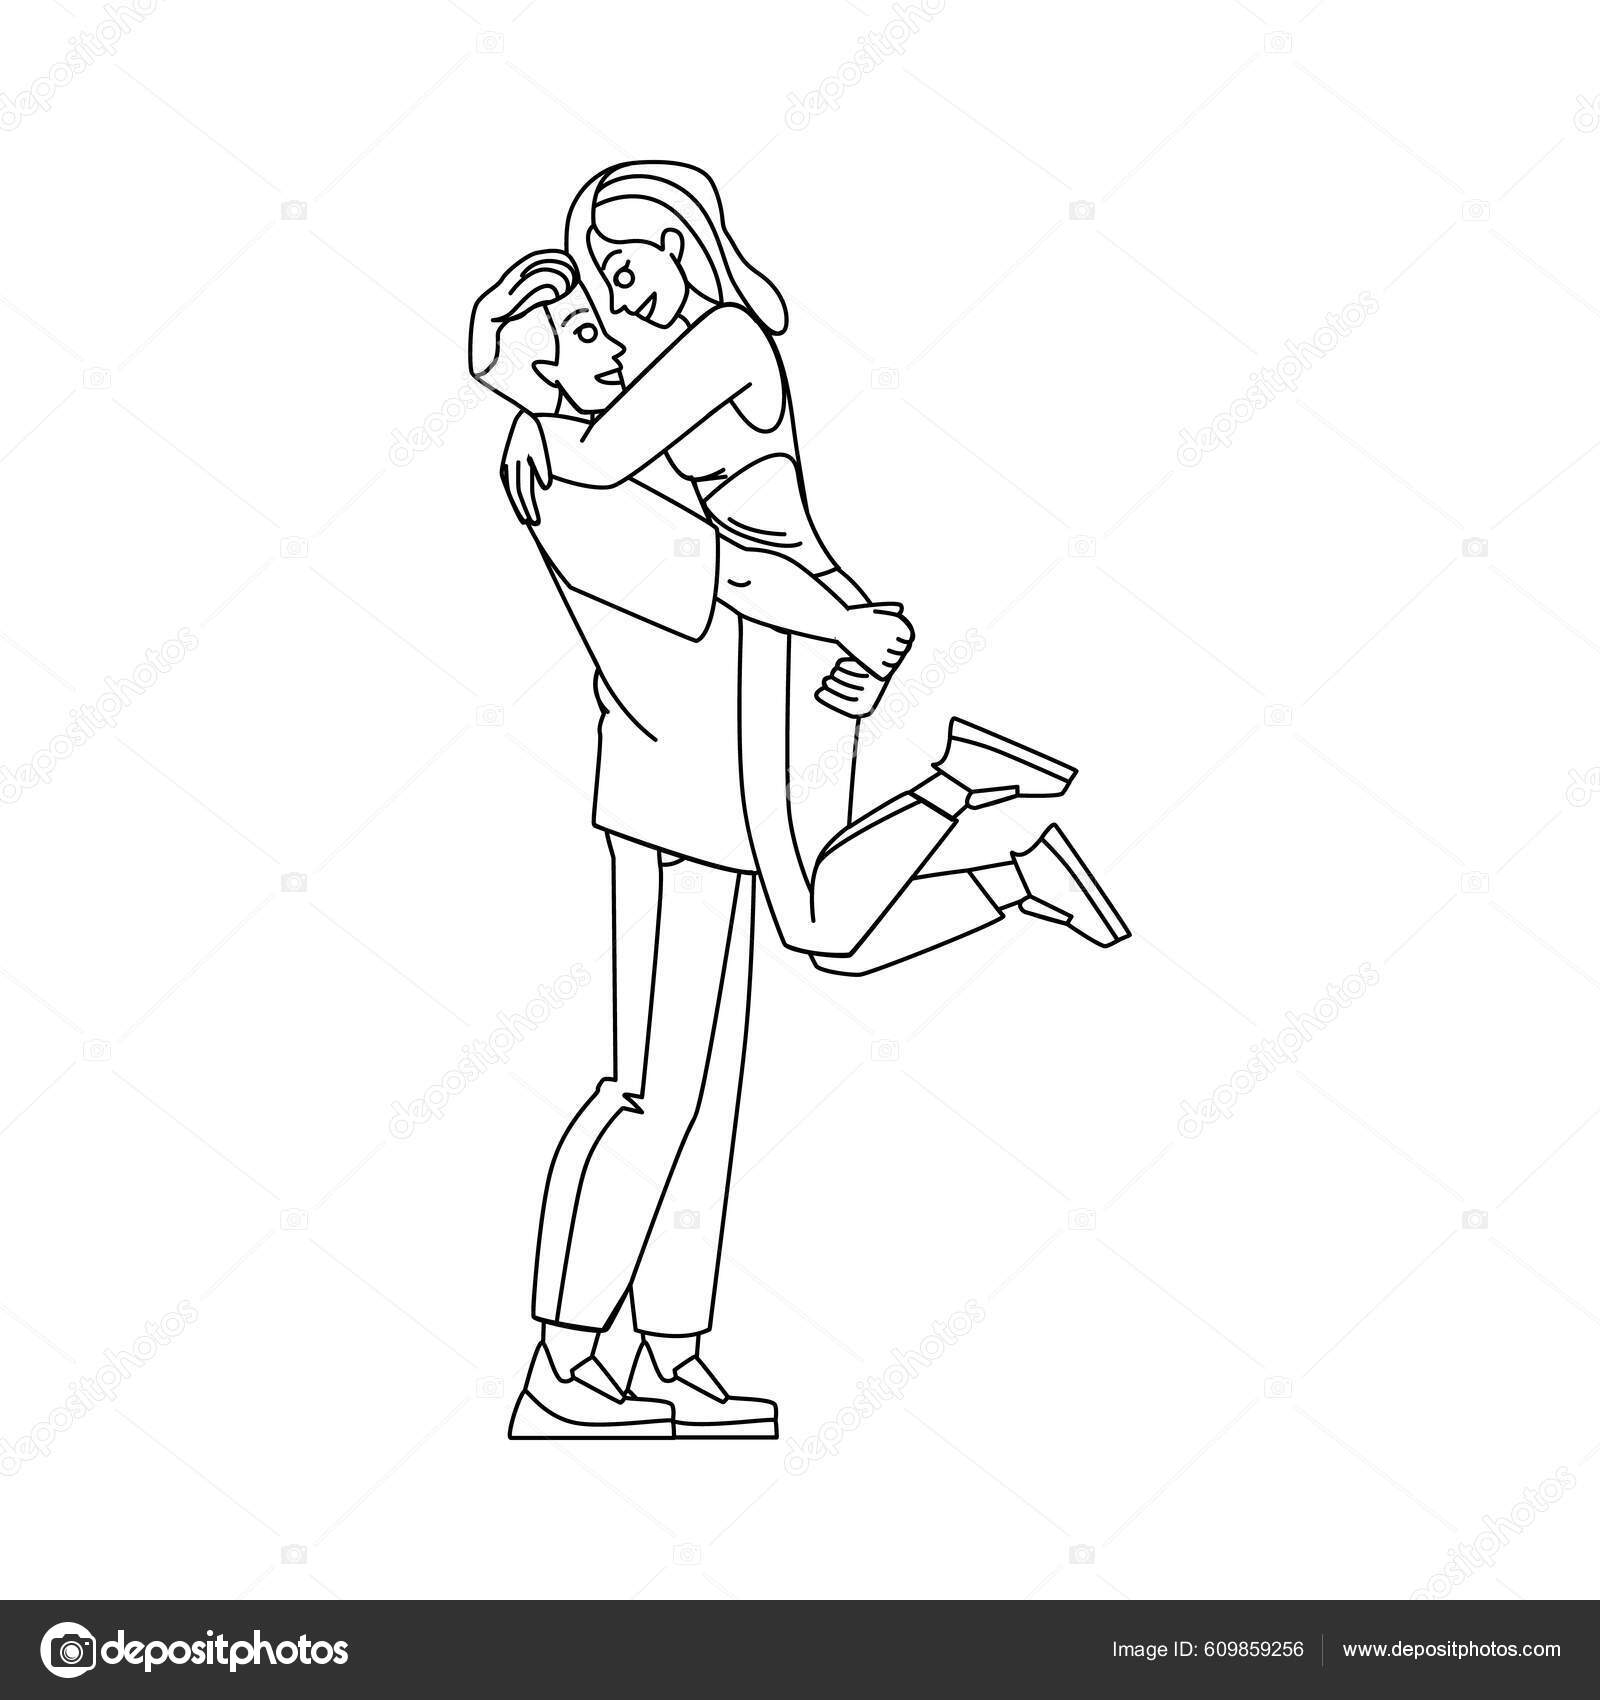 Couple Park Line Pencil Drawing Vector Happy Nature Woman Man Stock Vector  by ©2037519.gmail.com 609863740